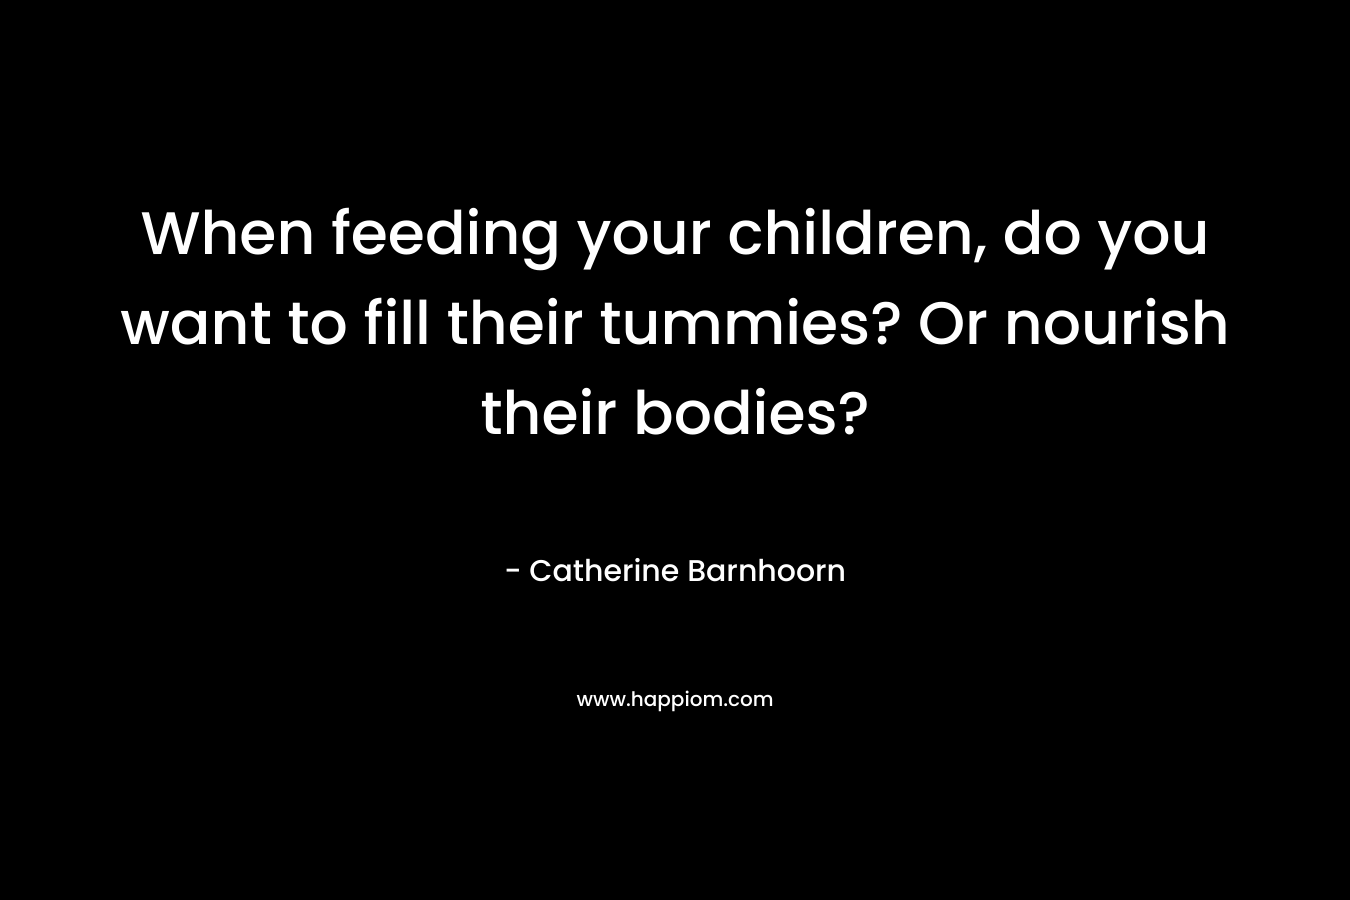 When feeding your children, do you want to fill their tummies? Or nourish their bodies? – Catherine Barnhoorn